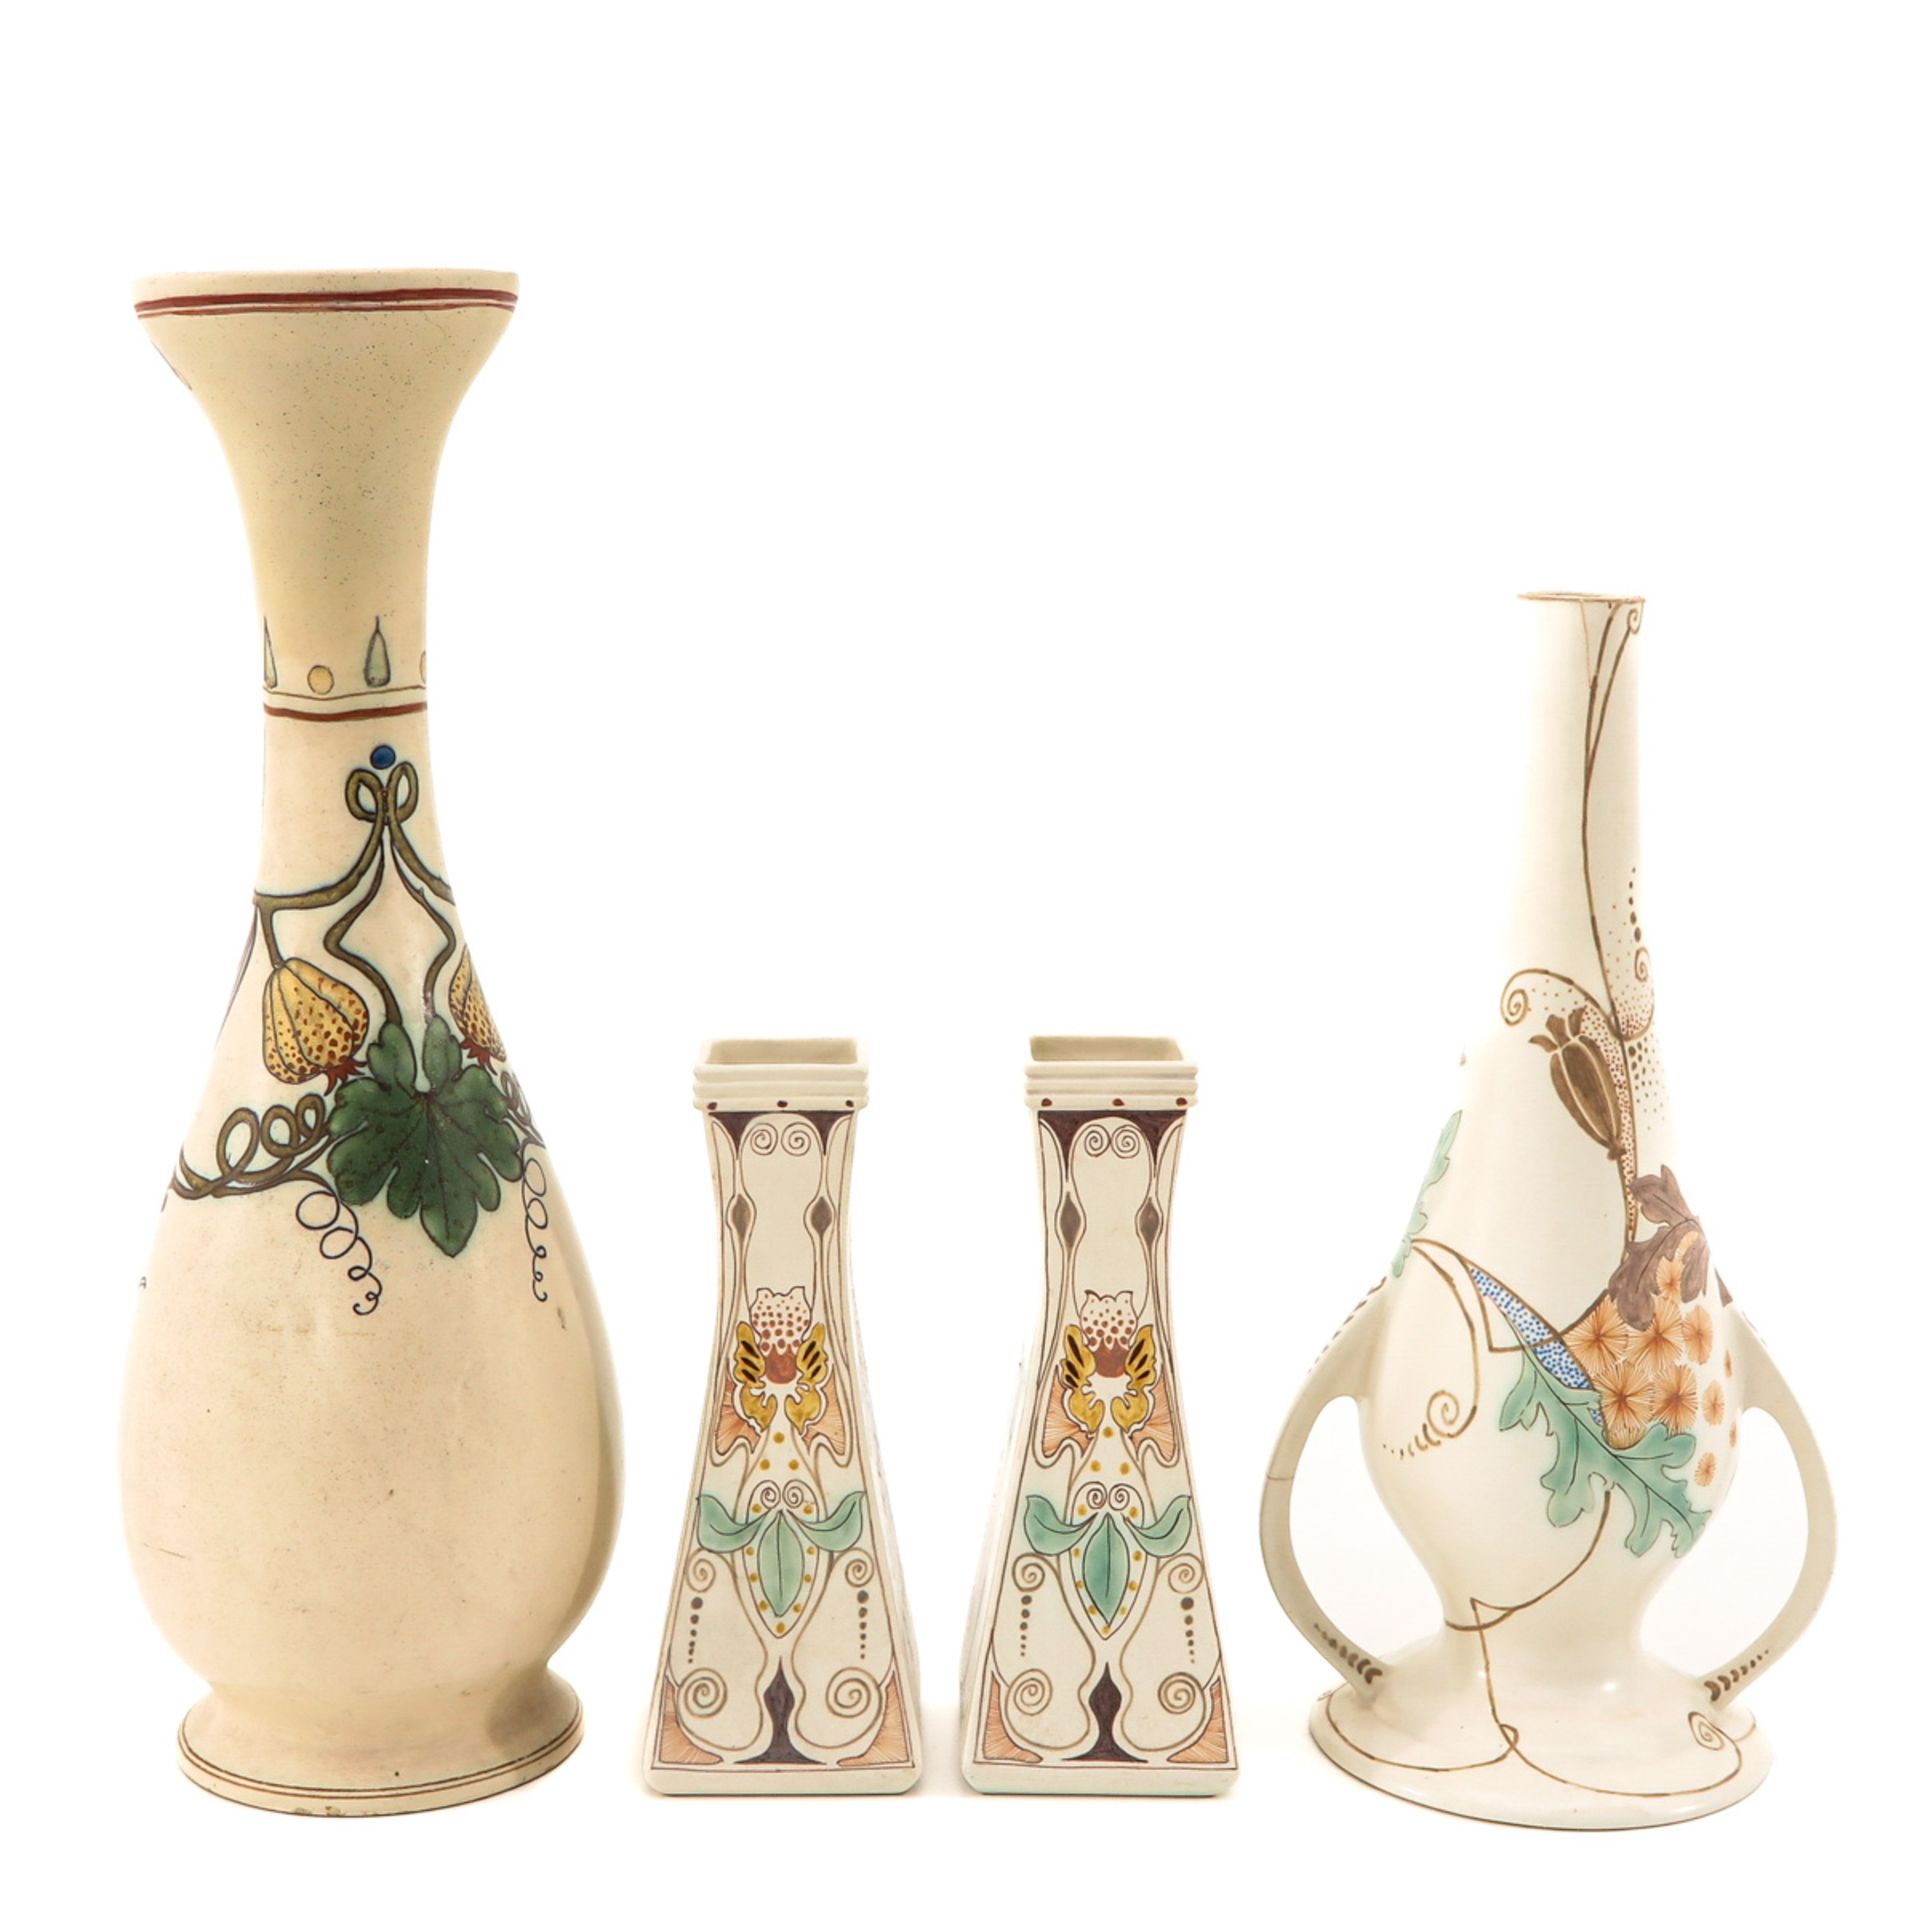 A Collection of 4 Vases - Image 3 of 10